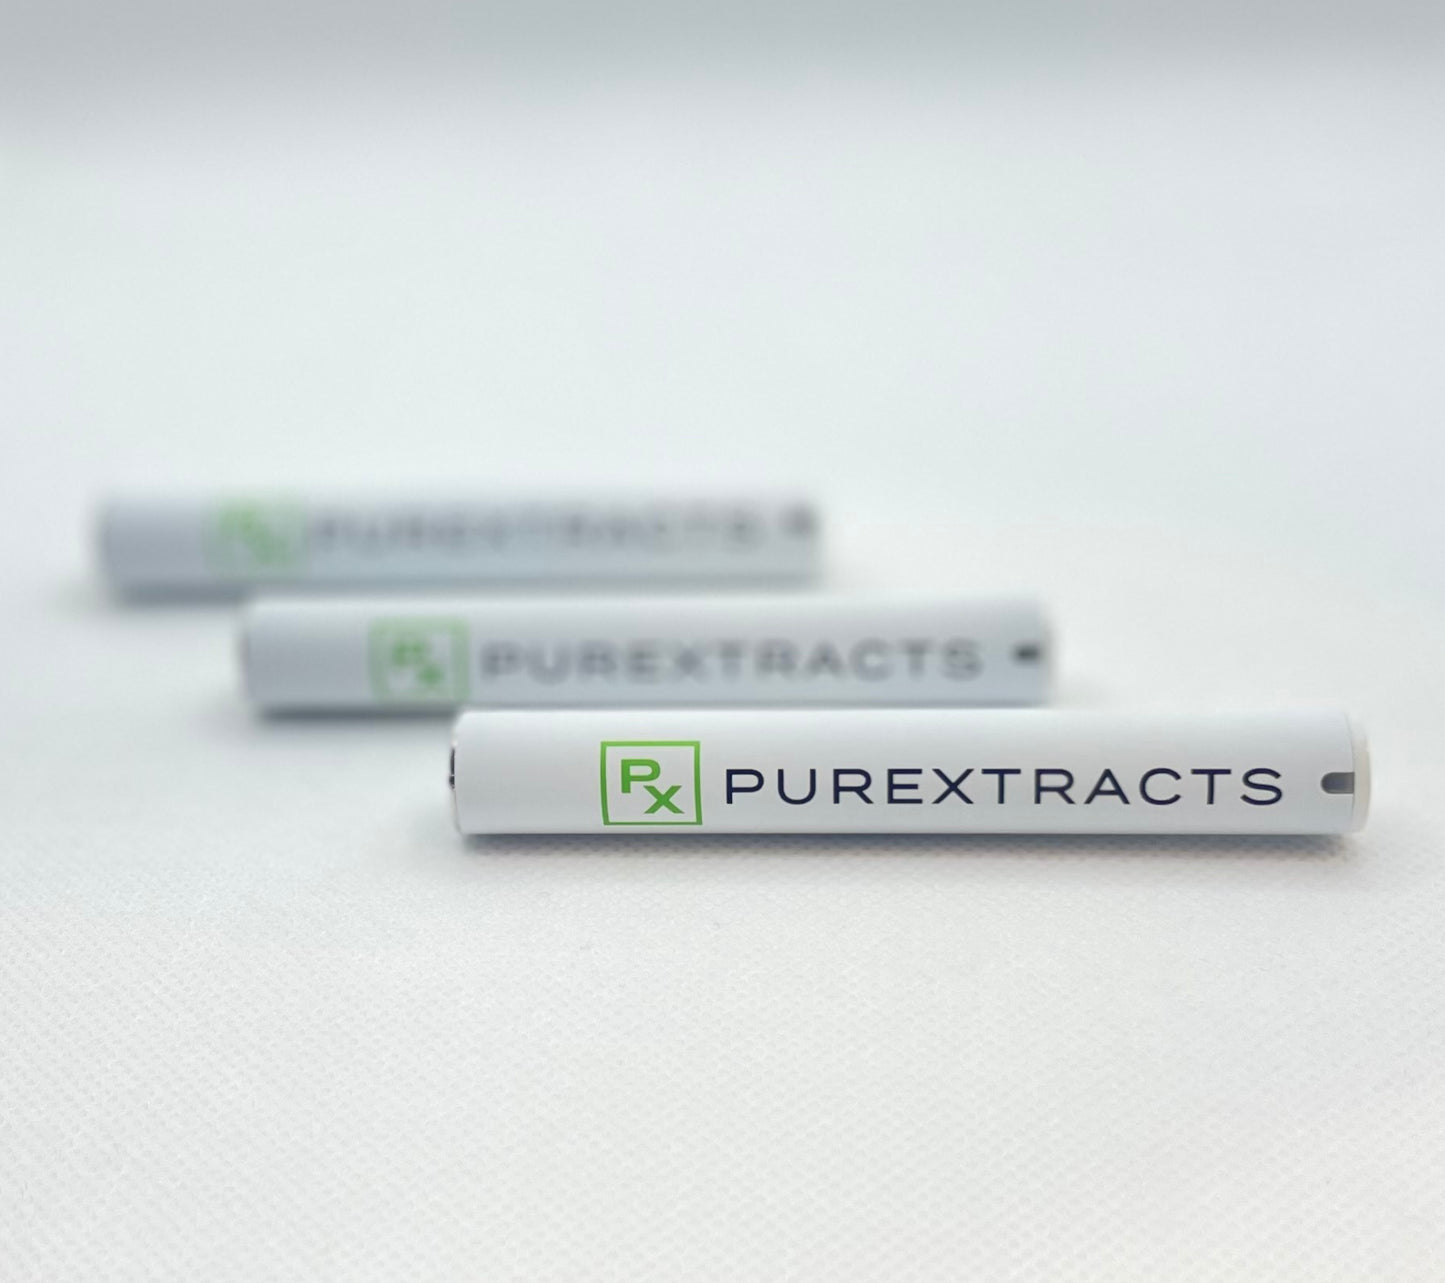 PUREXTRACTS multimode USB-C battery